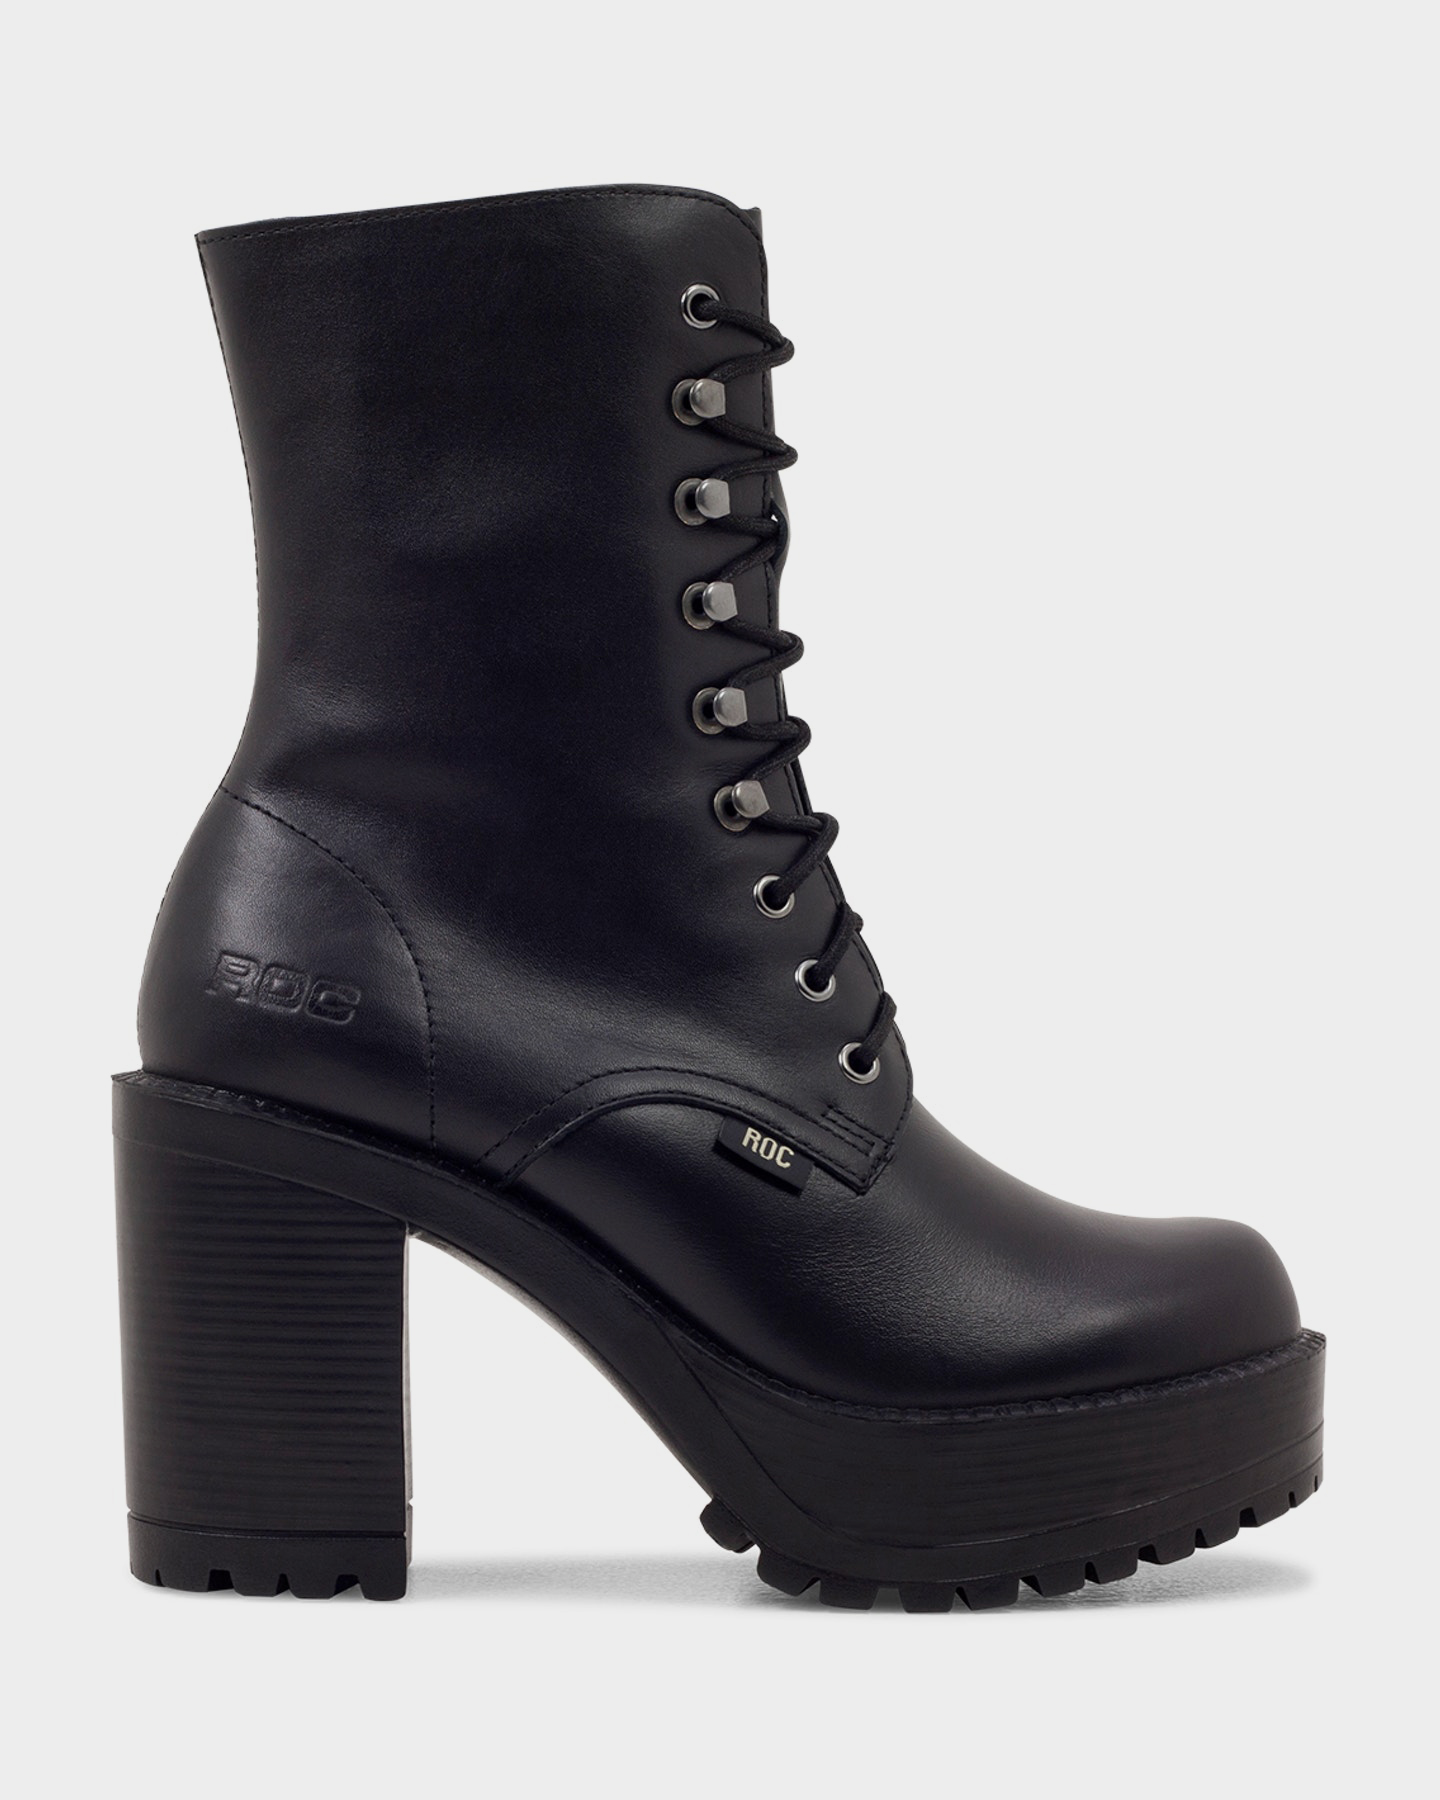 Roc Boots Lush Boot - Black Leather | SurfStitch